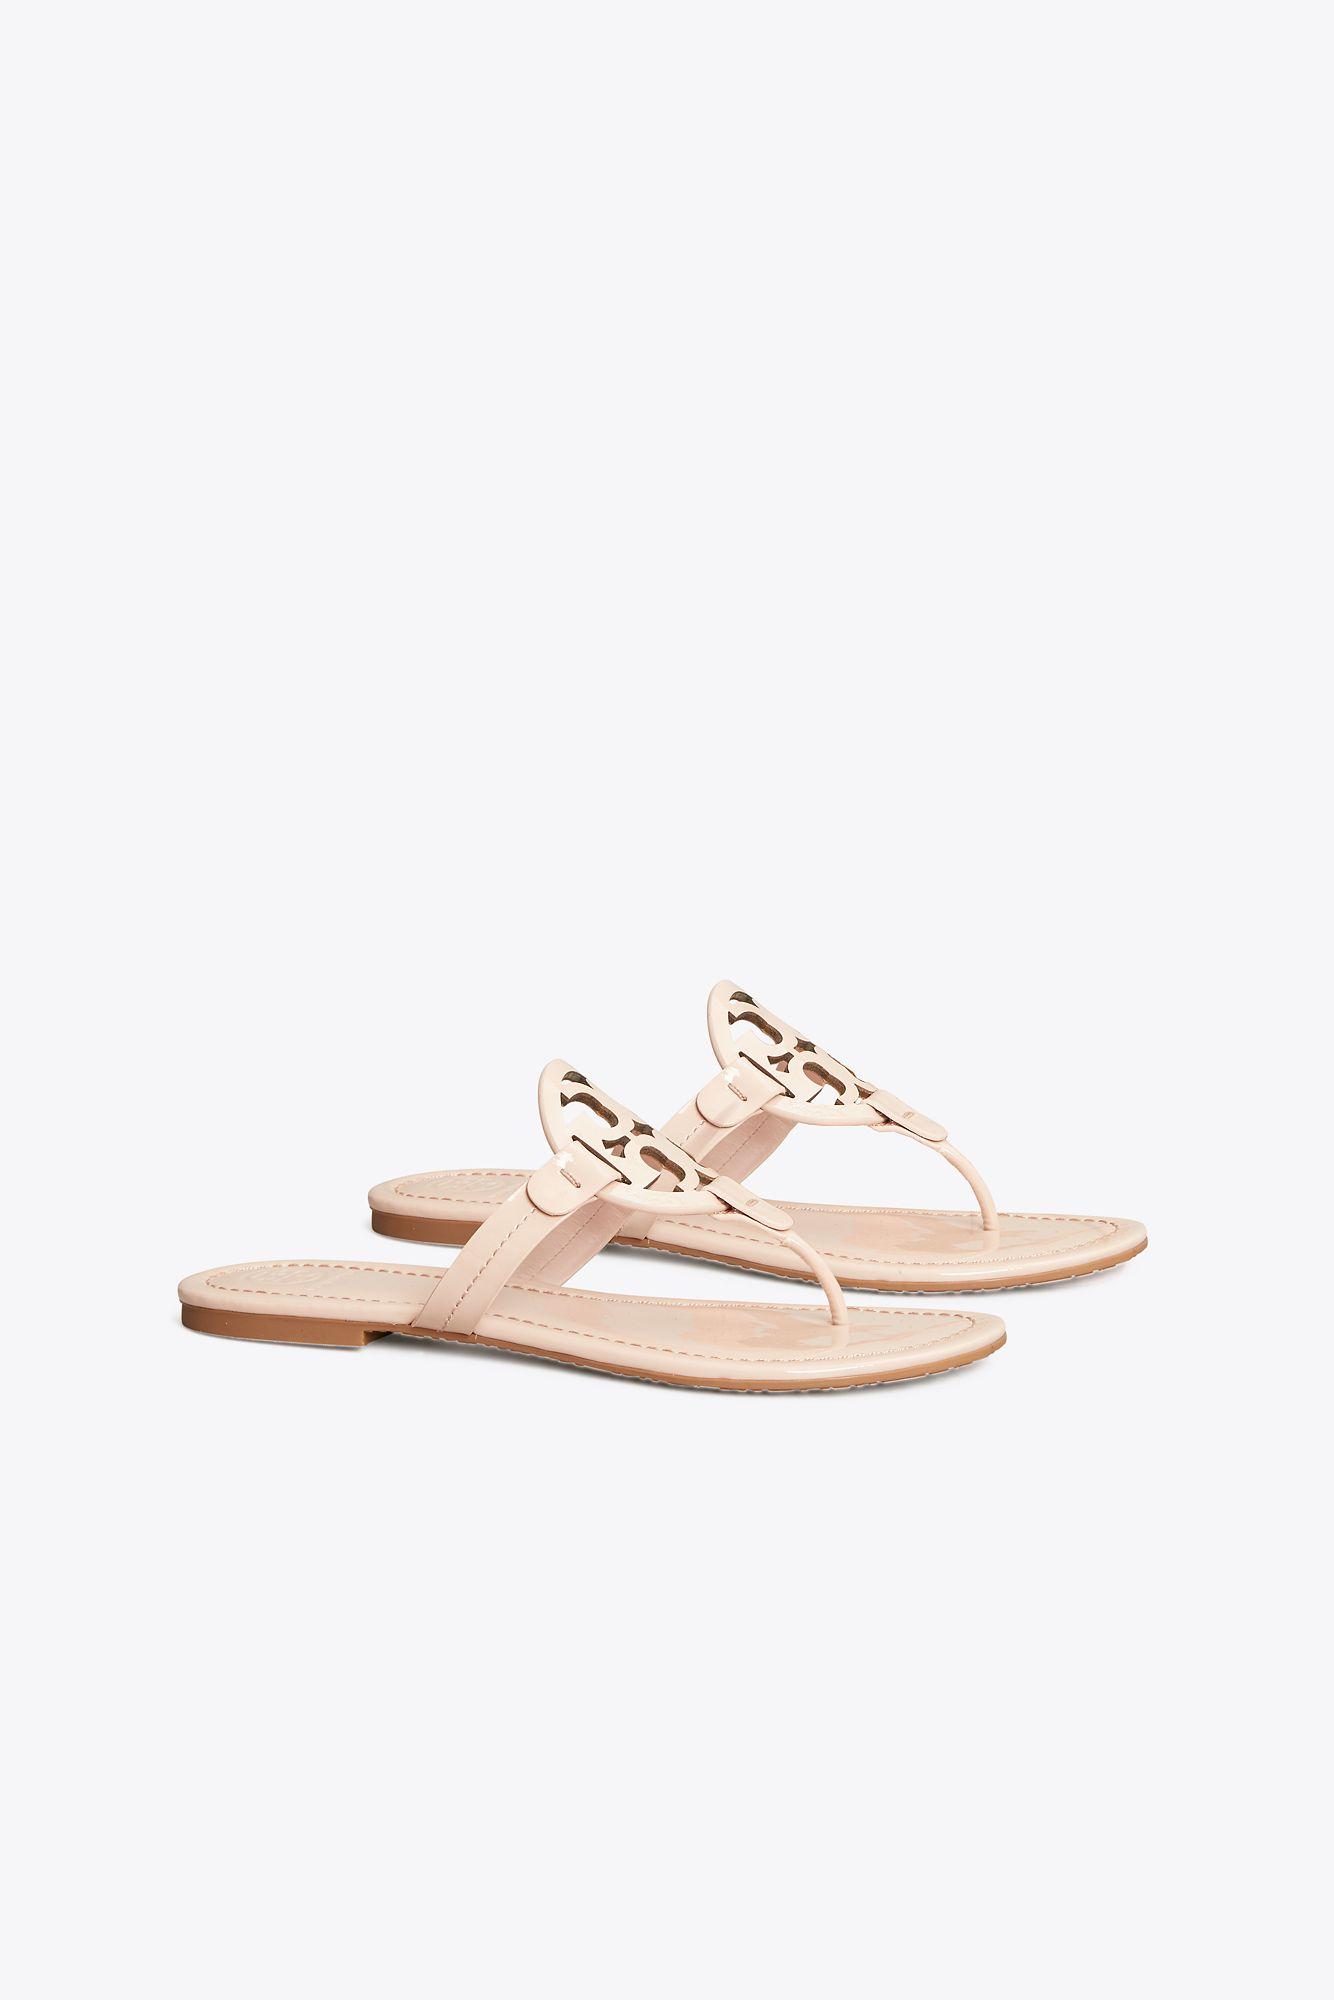 Tory Burch Miller Patent Leather Thong Sandals in Pink | Lyst